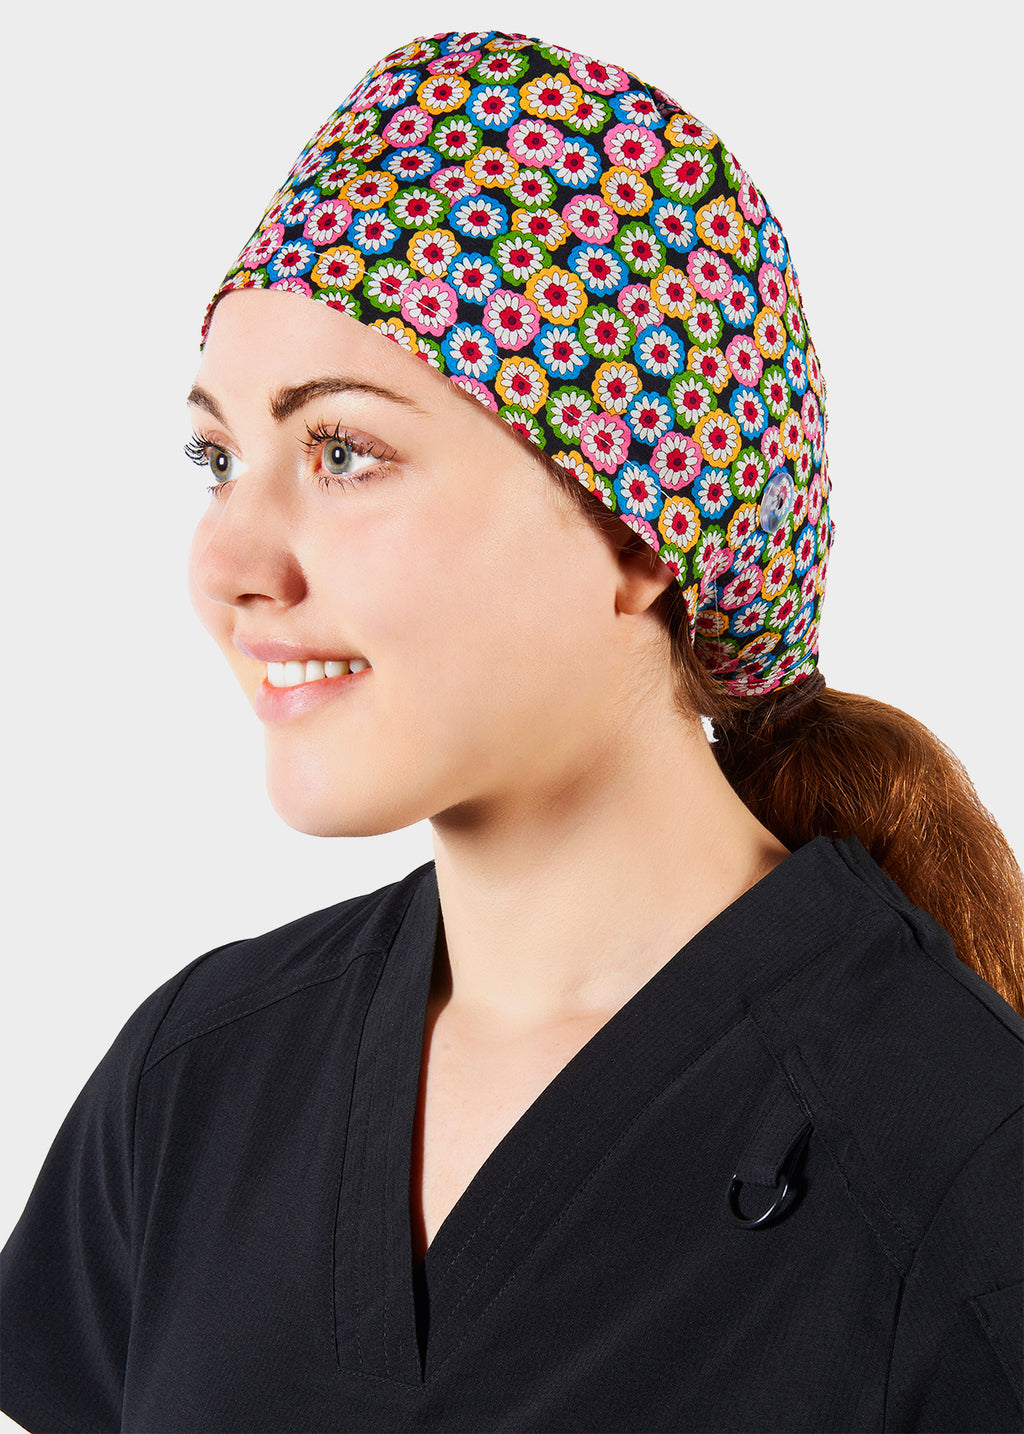 Product - MOBB Unisex Surgeon Cap With Side Buttons